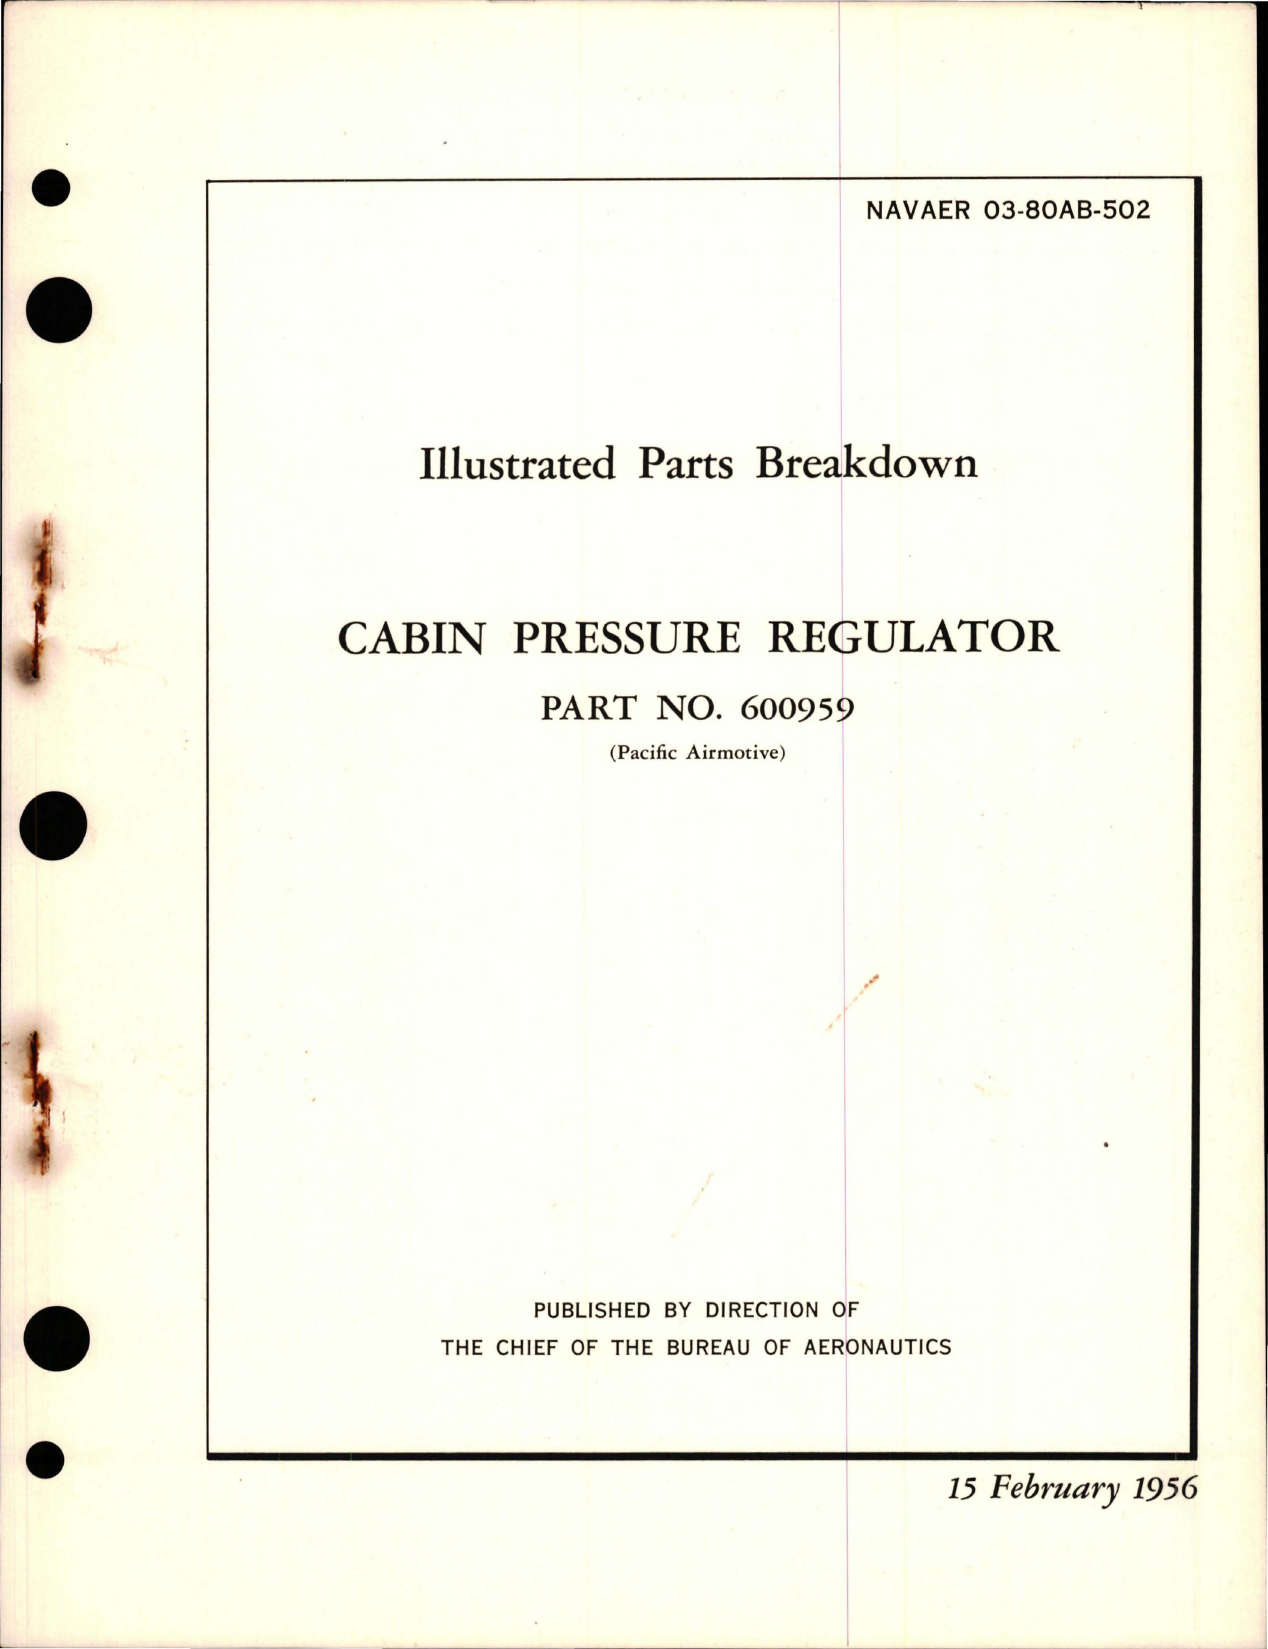 Sample page 1 from AirCorps Library document: Illustrated Parts Breakdown for Cabin Pressure Regulator - Part 600959 